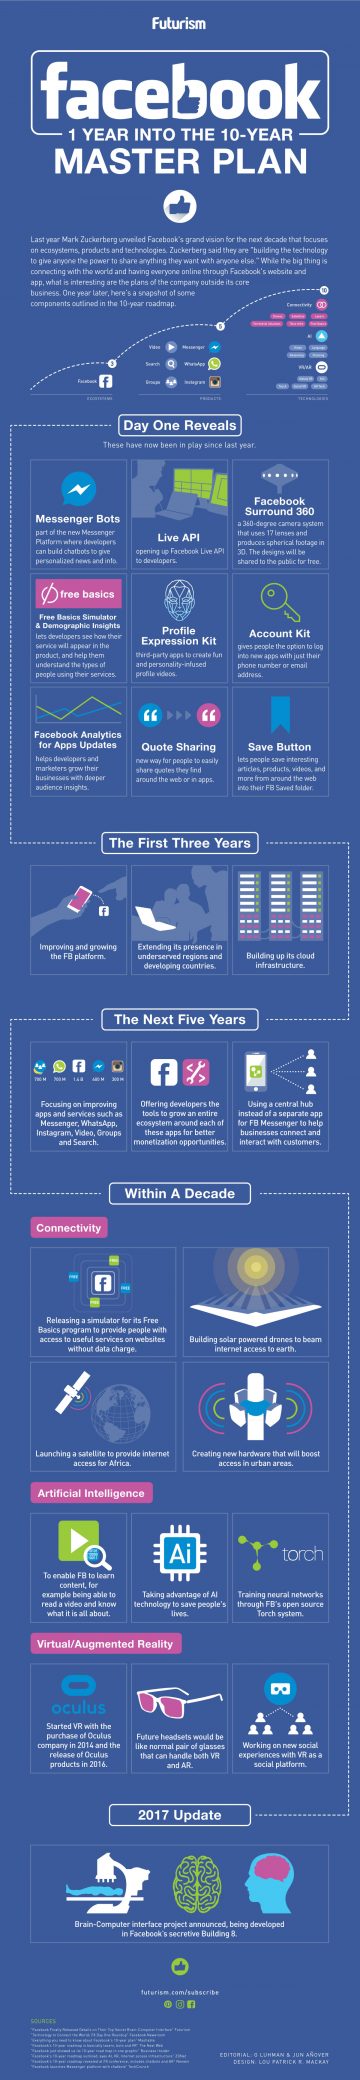 Inside Facebook’s 10-Year Master Plan [Infographic]